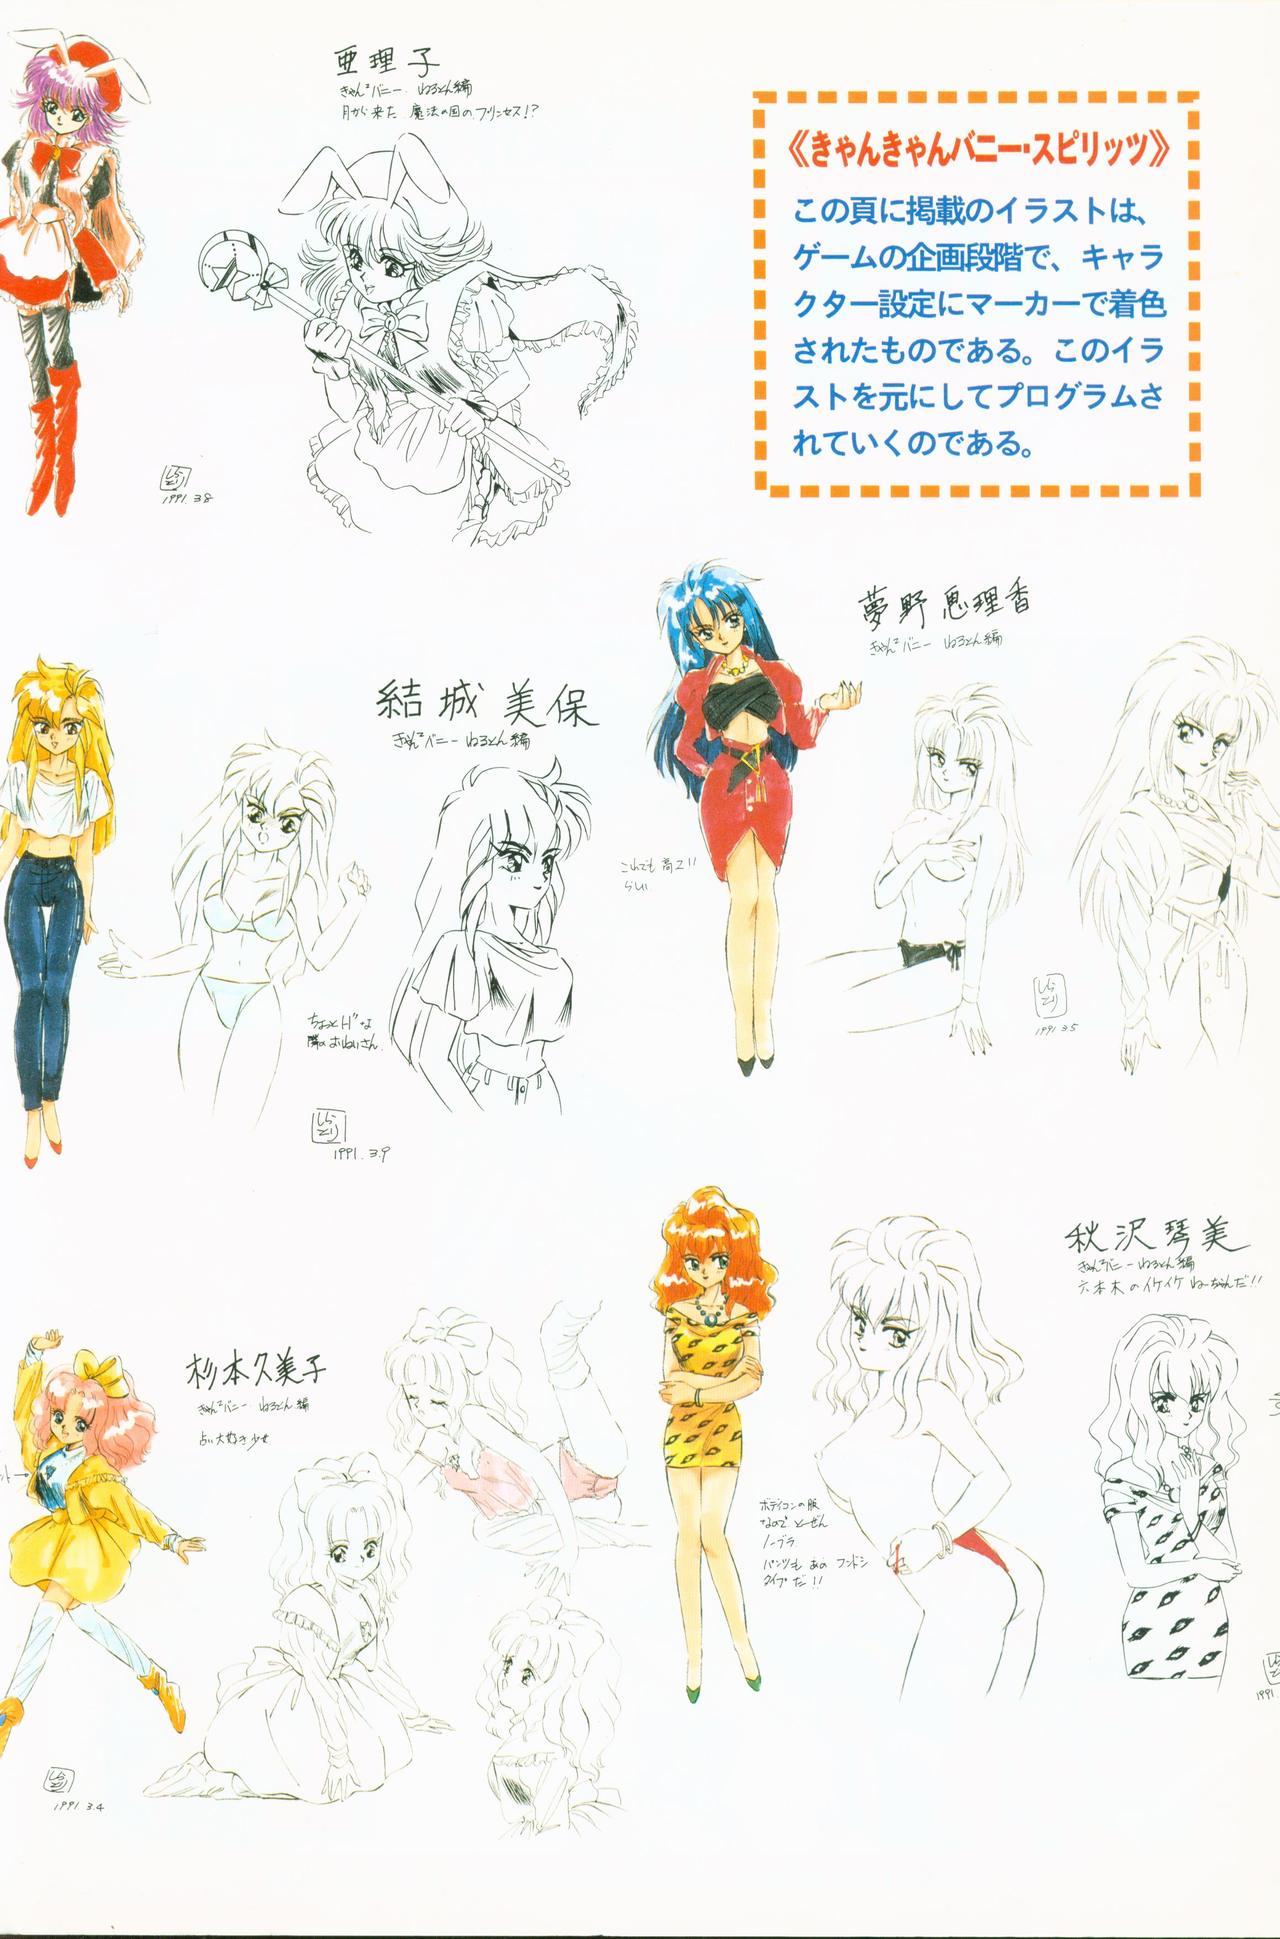 CAN CAN BUNNY OFFICIAL ART BOOK 3